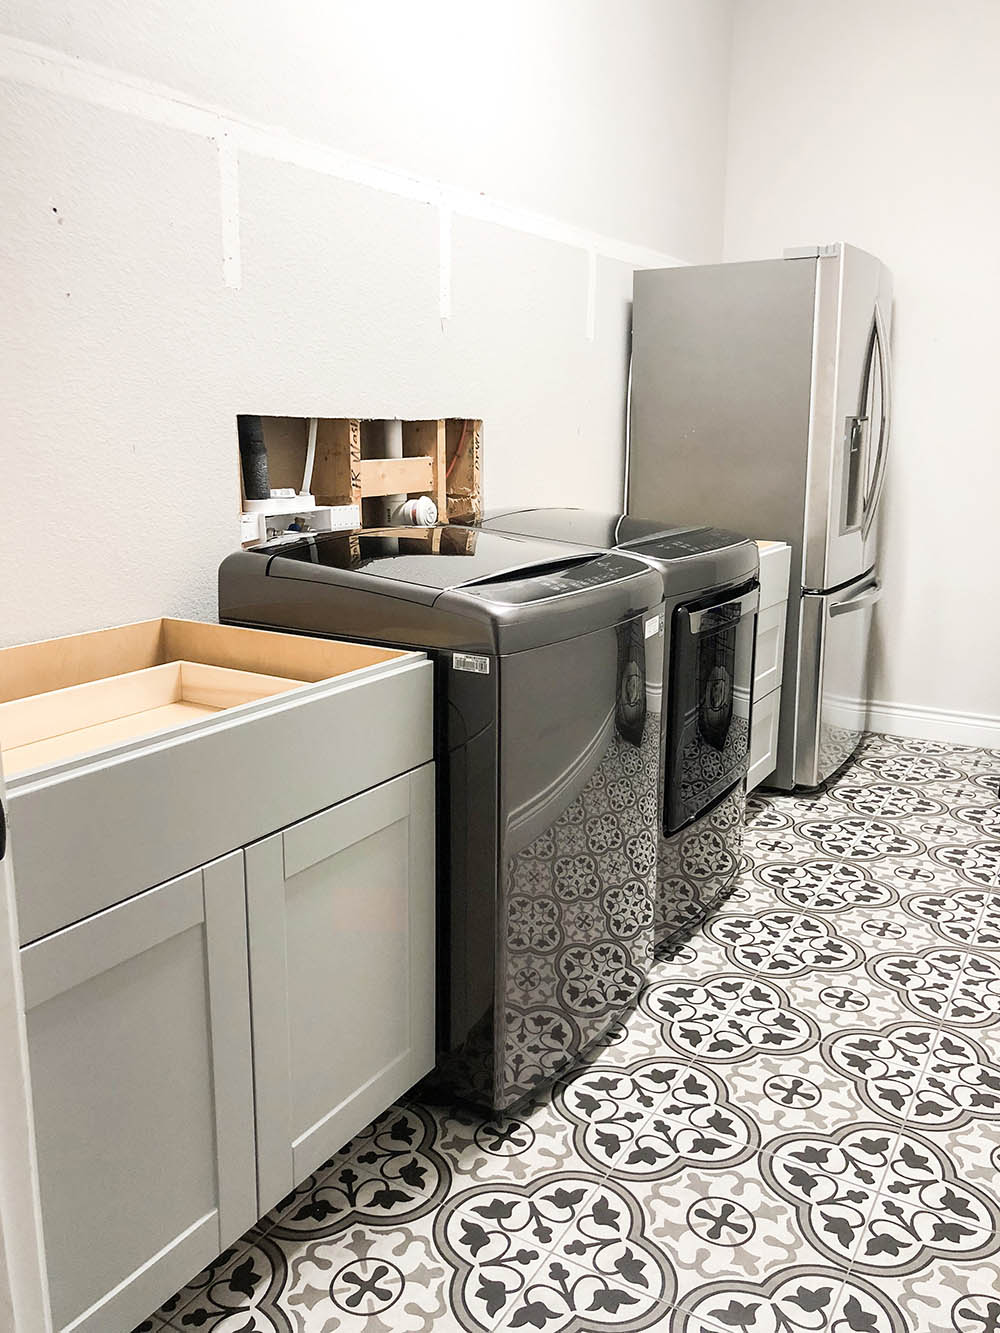 Laundry room with mosaic tiled flooring, black washer and dryer, grey cabinet and a refrigerator. 